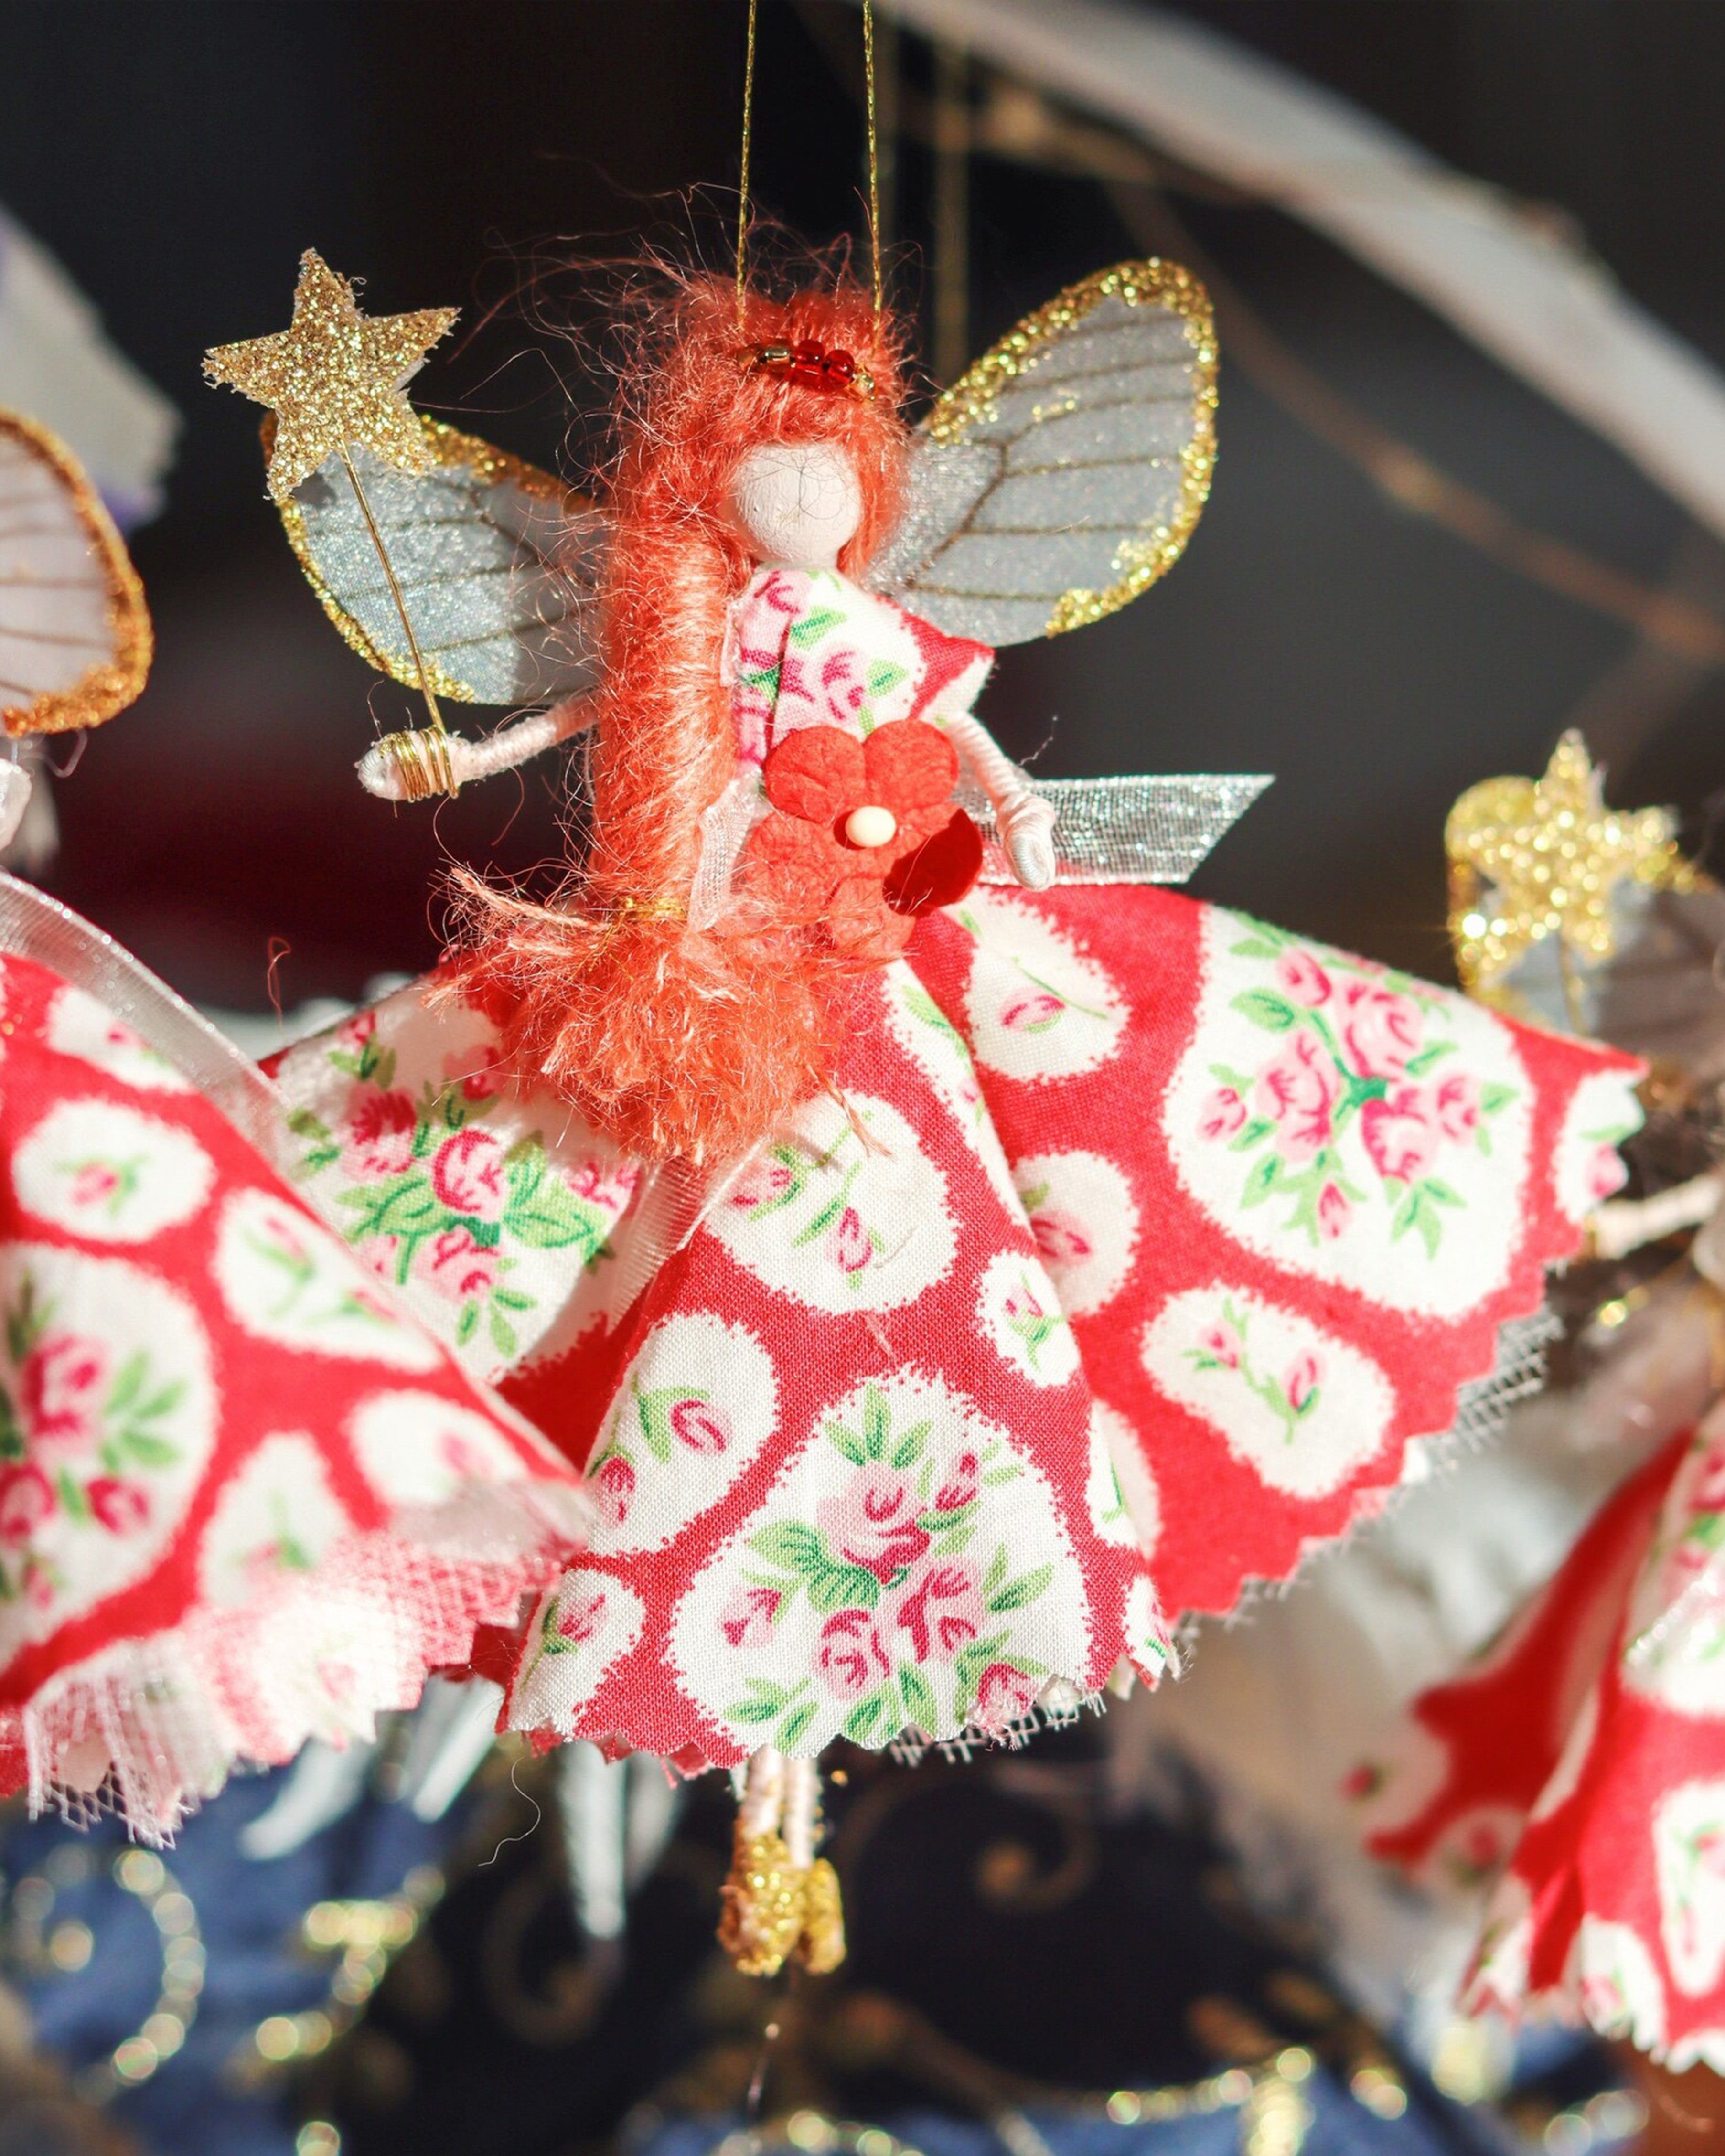 Red headed fairy wearing a floral pink dress